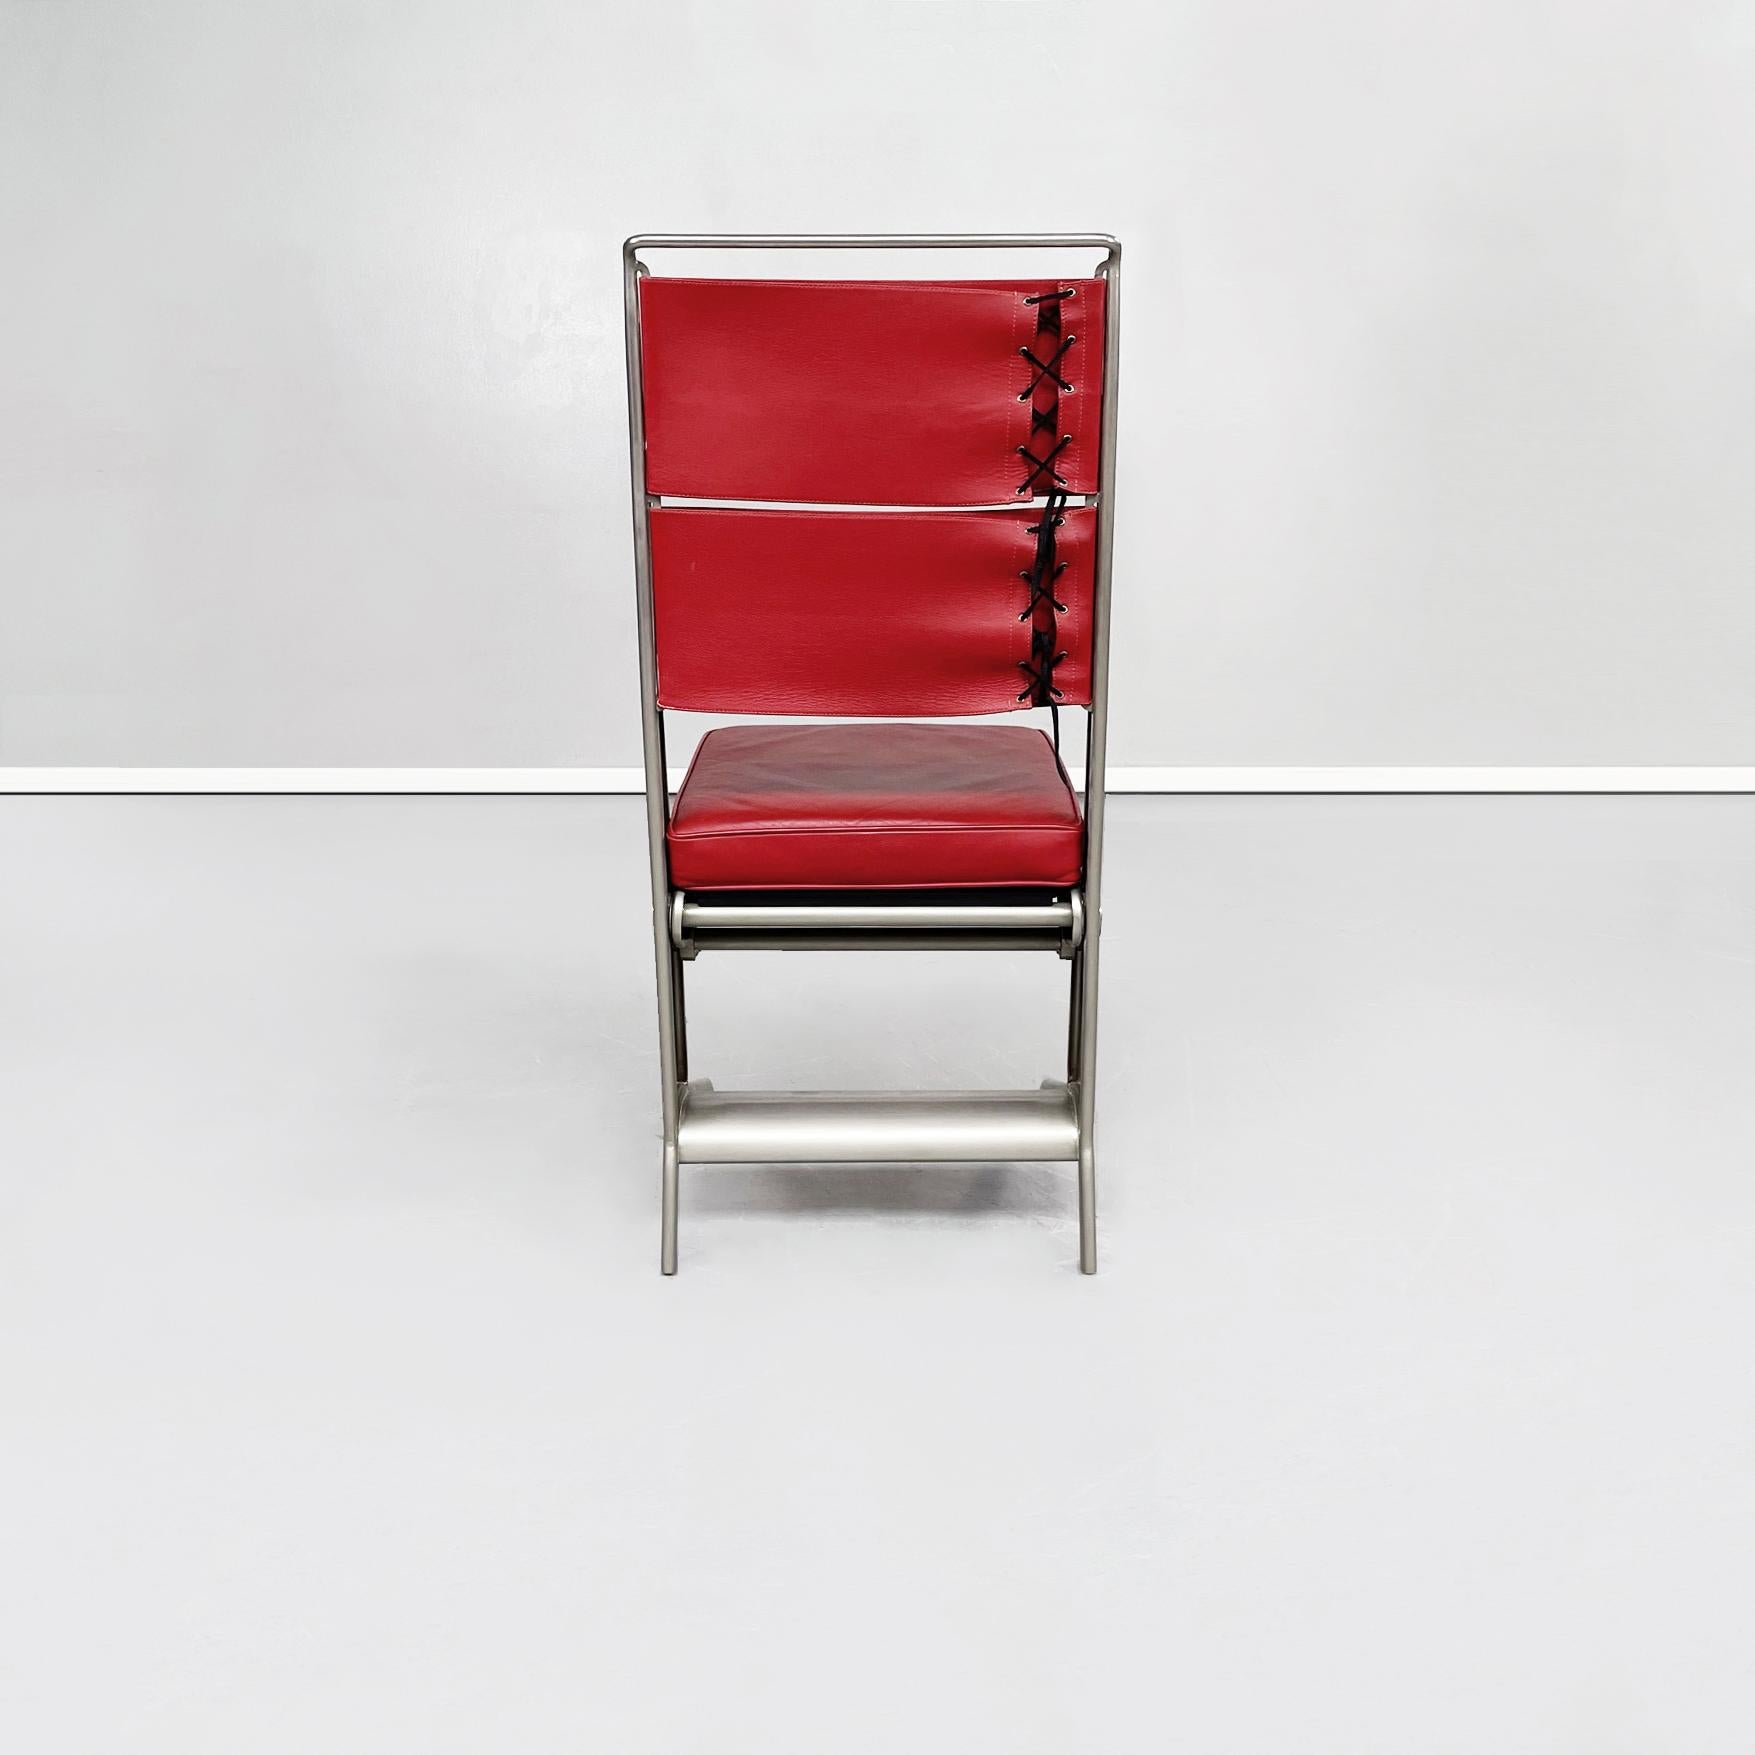 Late 20th Century French Mid-Century Red Leather and Steel Chairs by Jean Prouvé for Tecta, 1980s